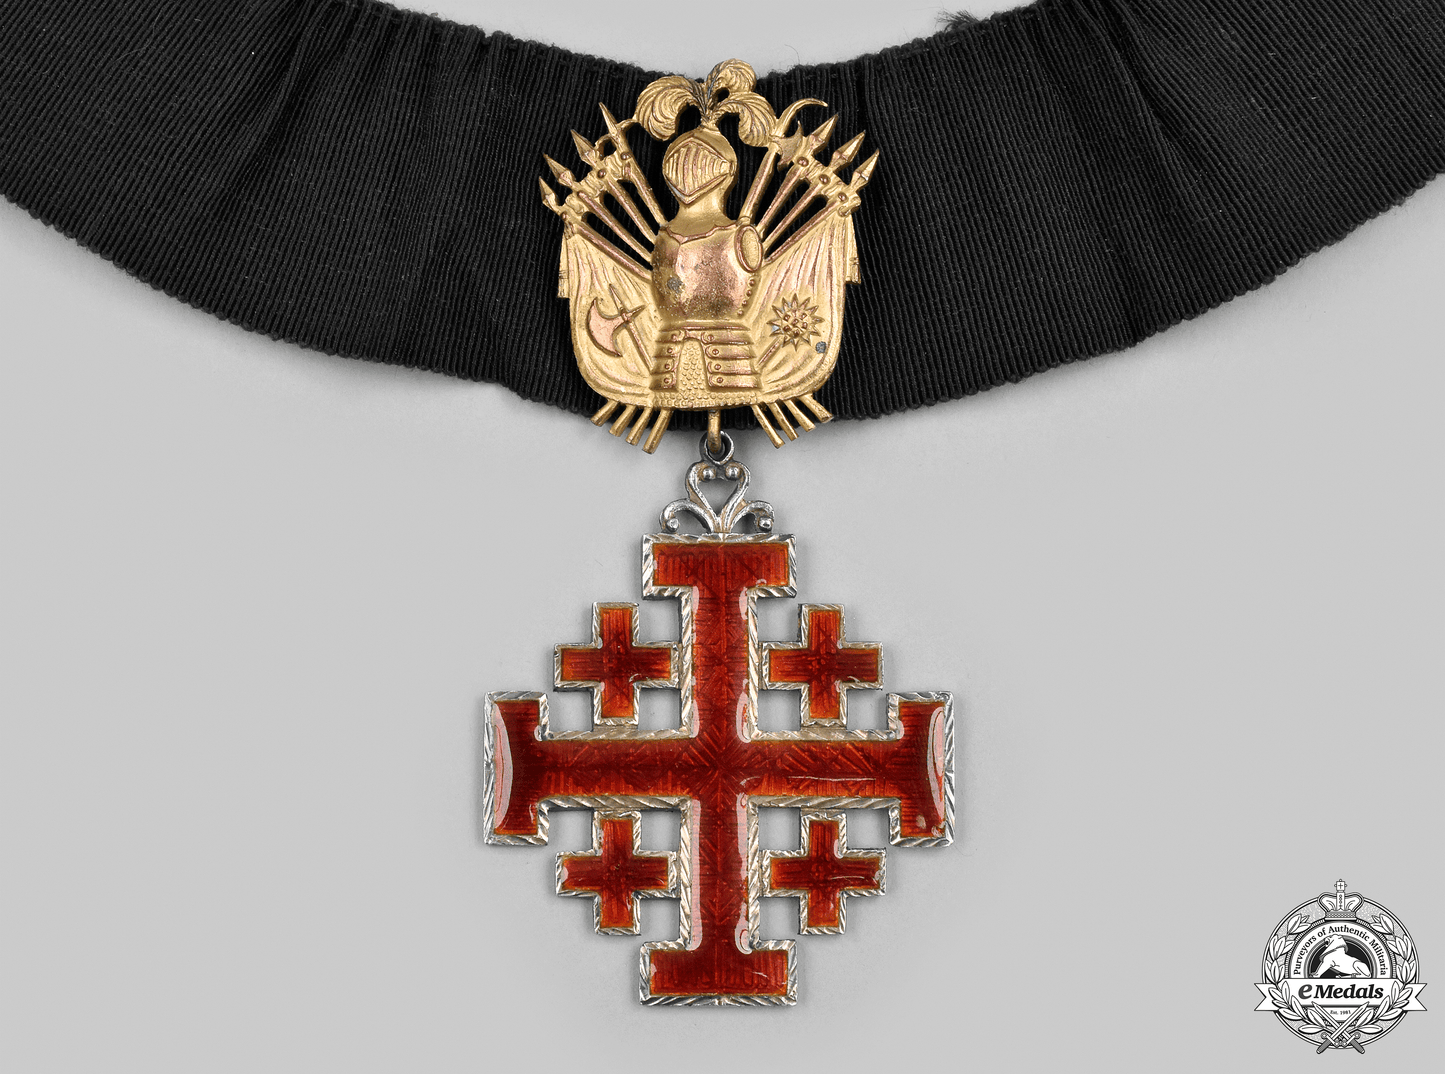 vatican._an_order_of_the_holy_sepulchre_of_jerusalem,_ii_class_commander_for_gentleman_with_trophy_of_arms,_c.1930_m21_mnc3503_1